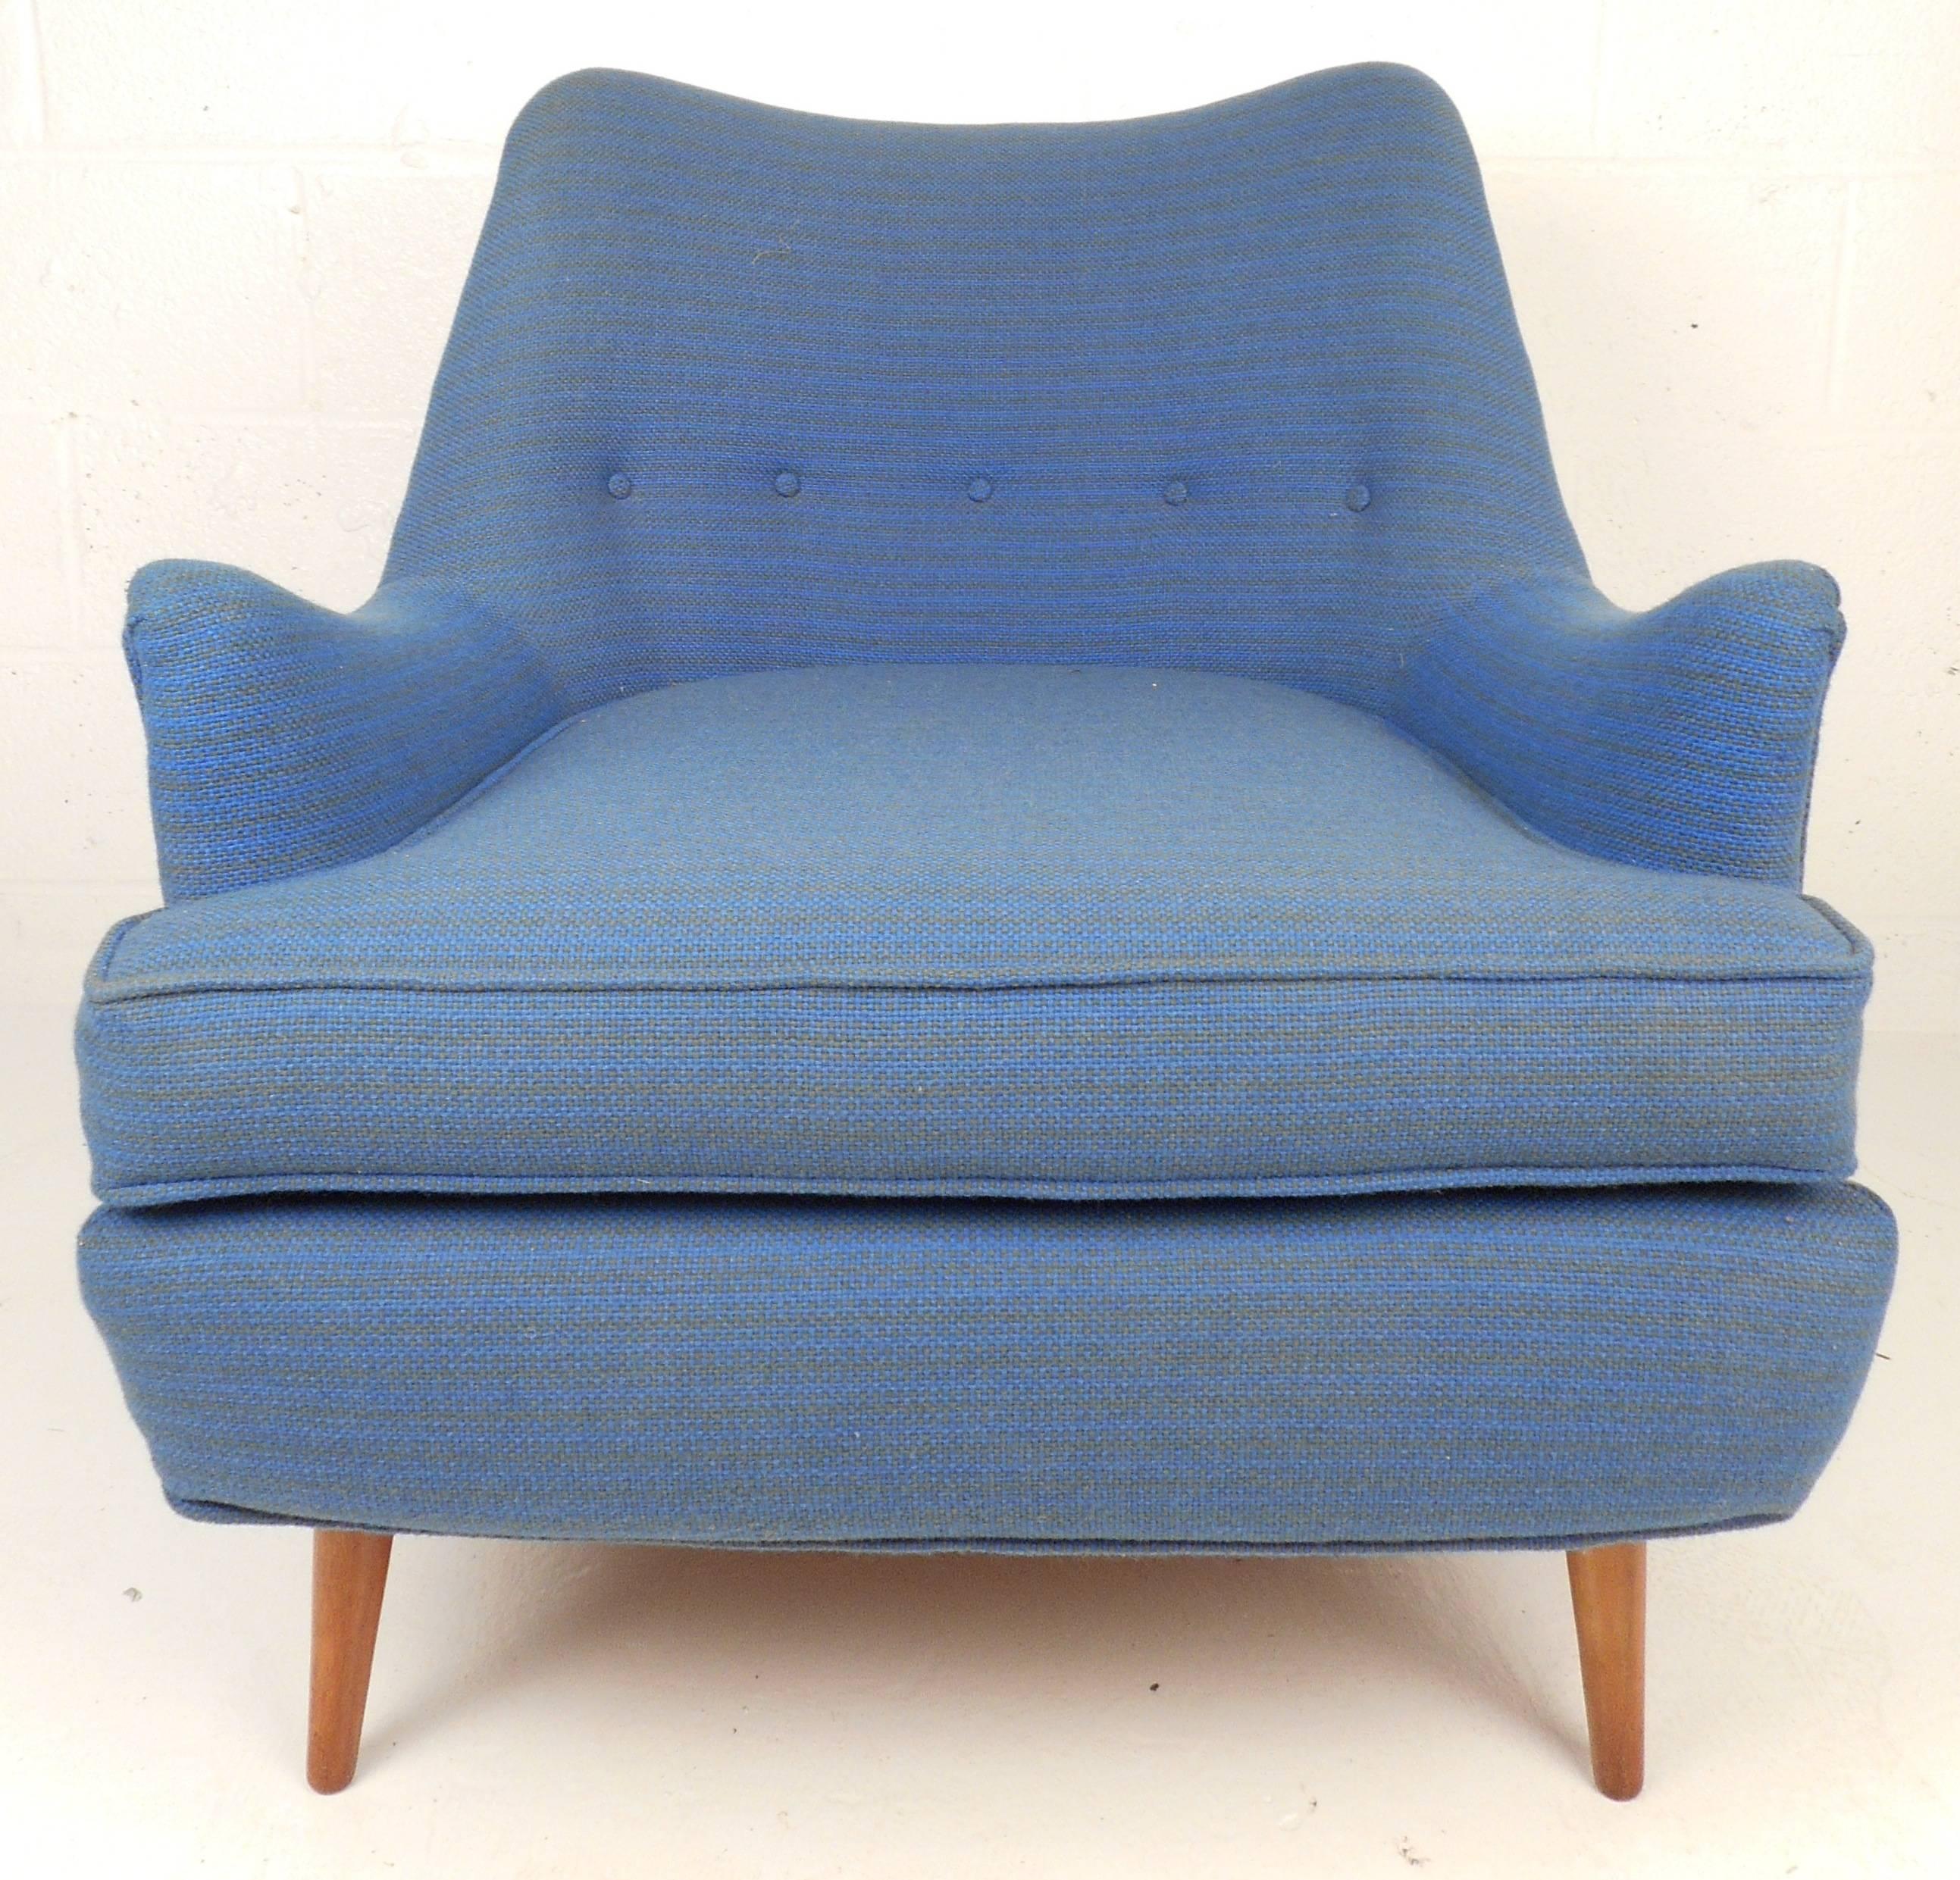 Stunning Mid-Century Modern lounge chair with sculpted armrests, tufted seat back and tapered legs. The stylish and comfortable baby blue armchair features shapely design that makes the perfect complement to any interior. Please confirm item